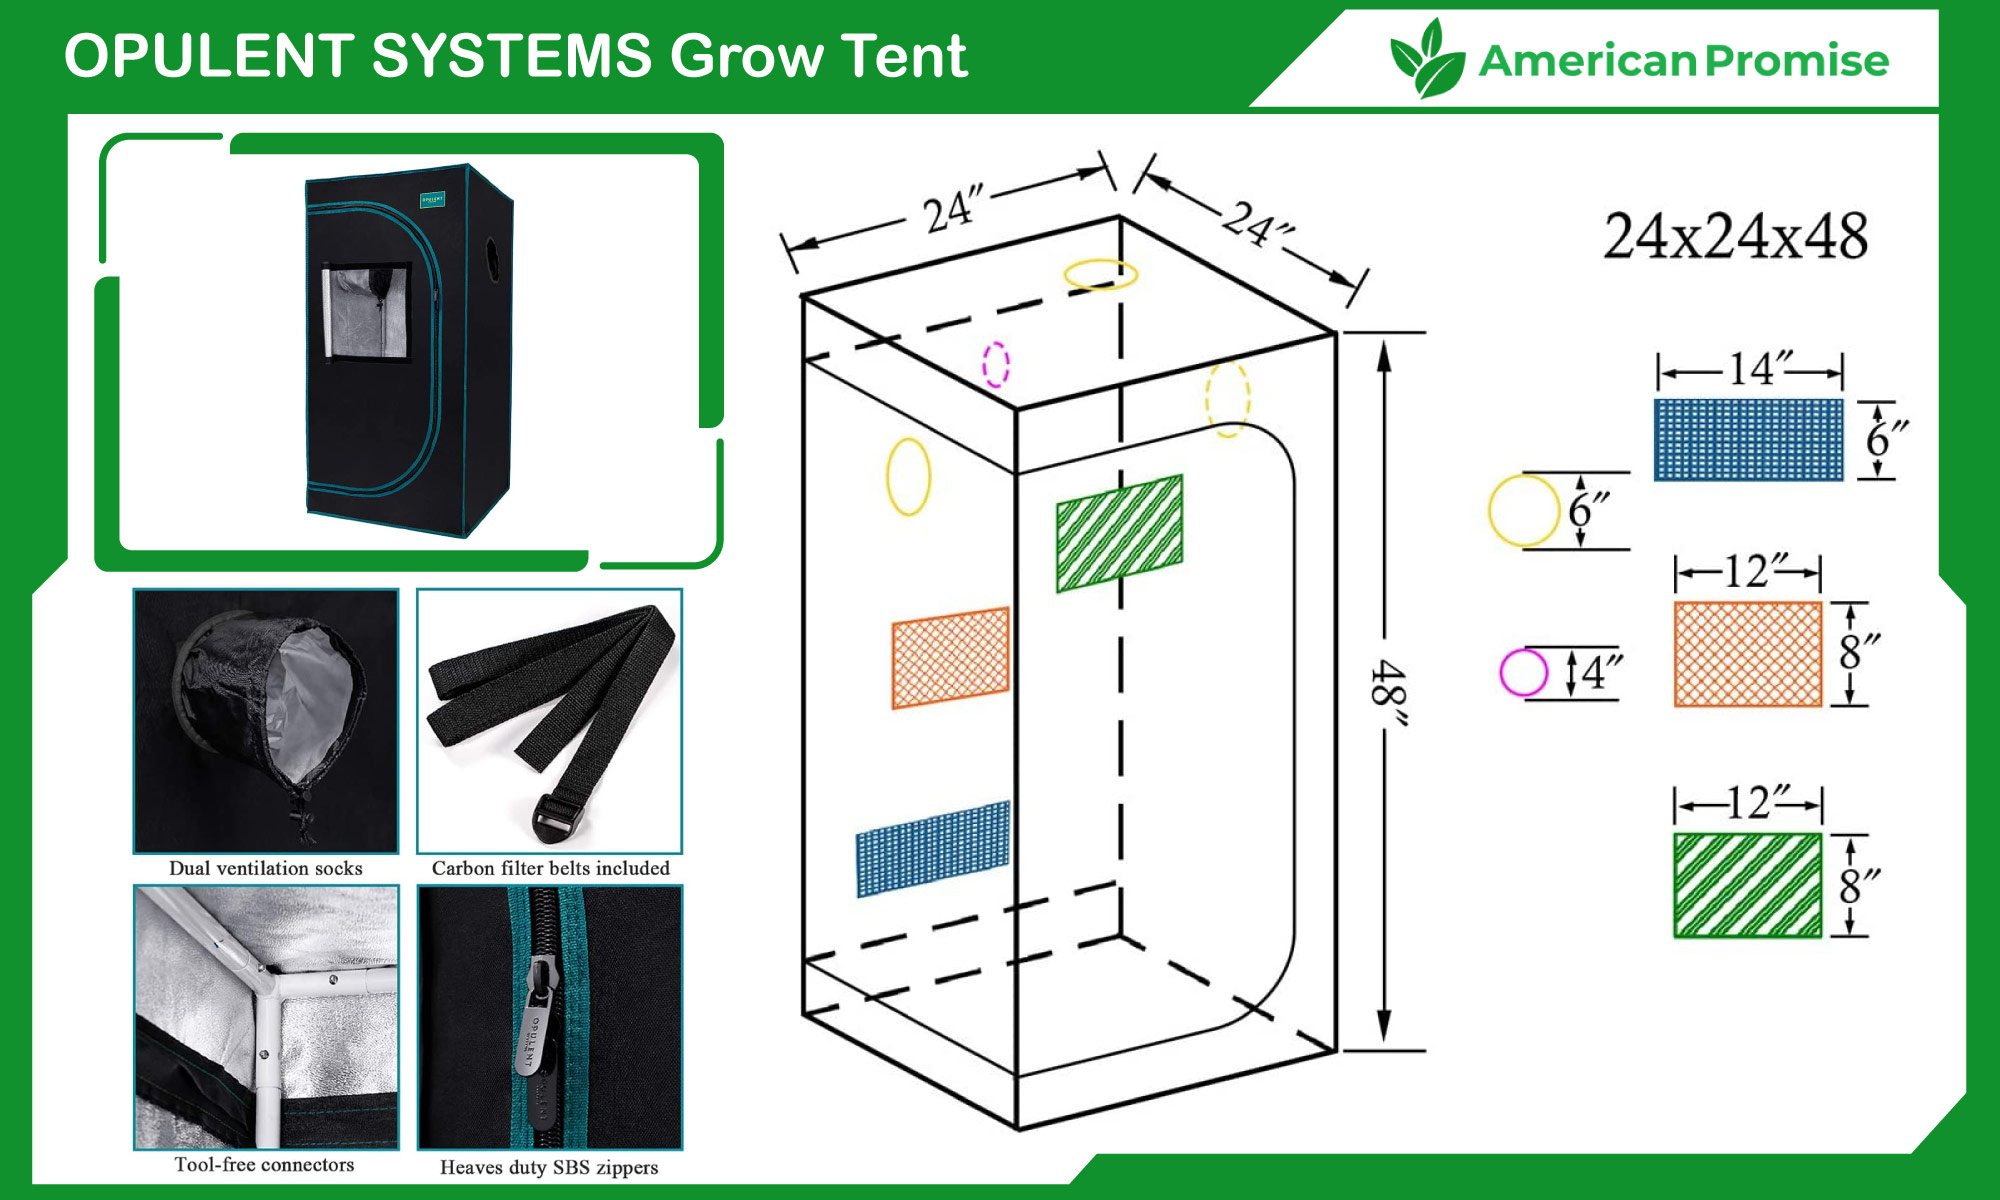 OPULENT SYSTEMS Grow Tent